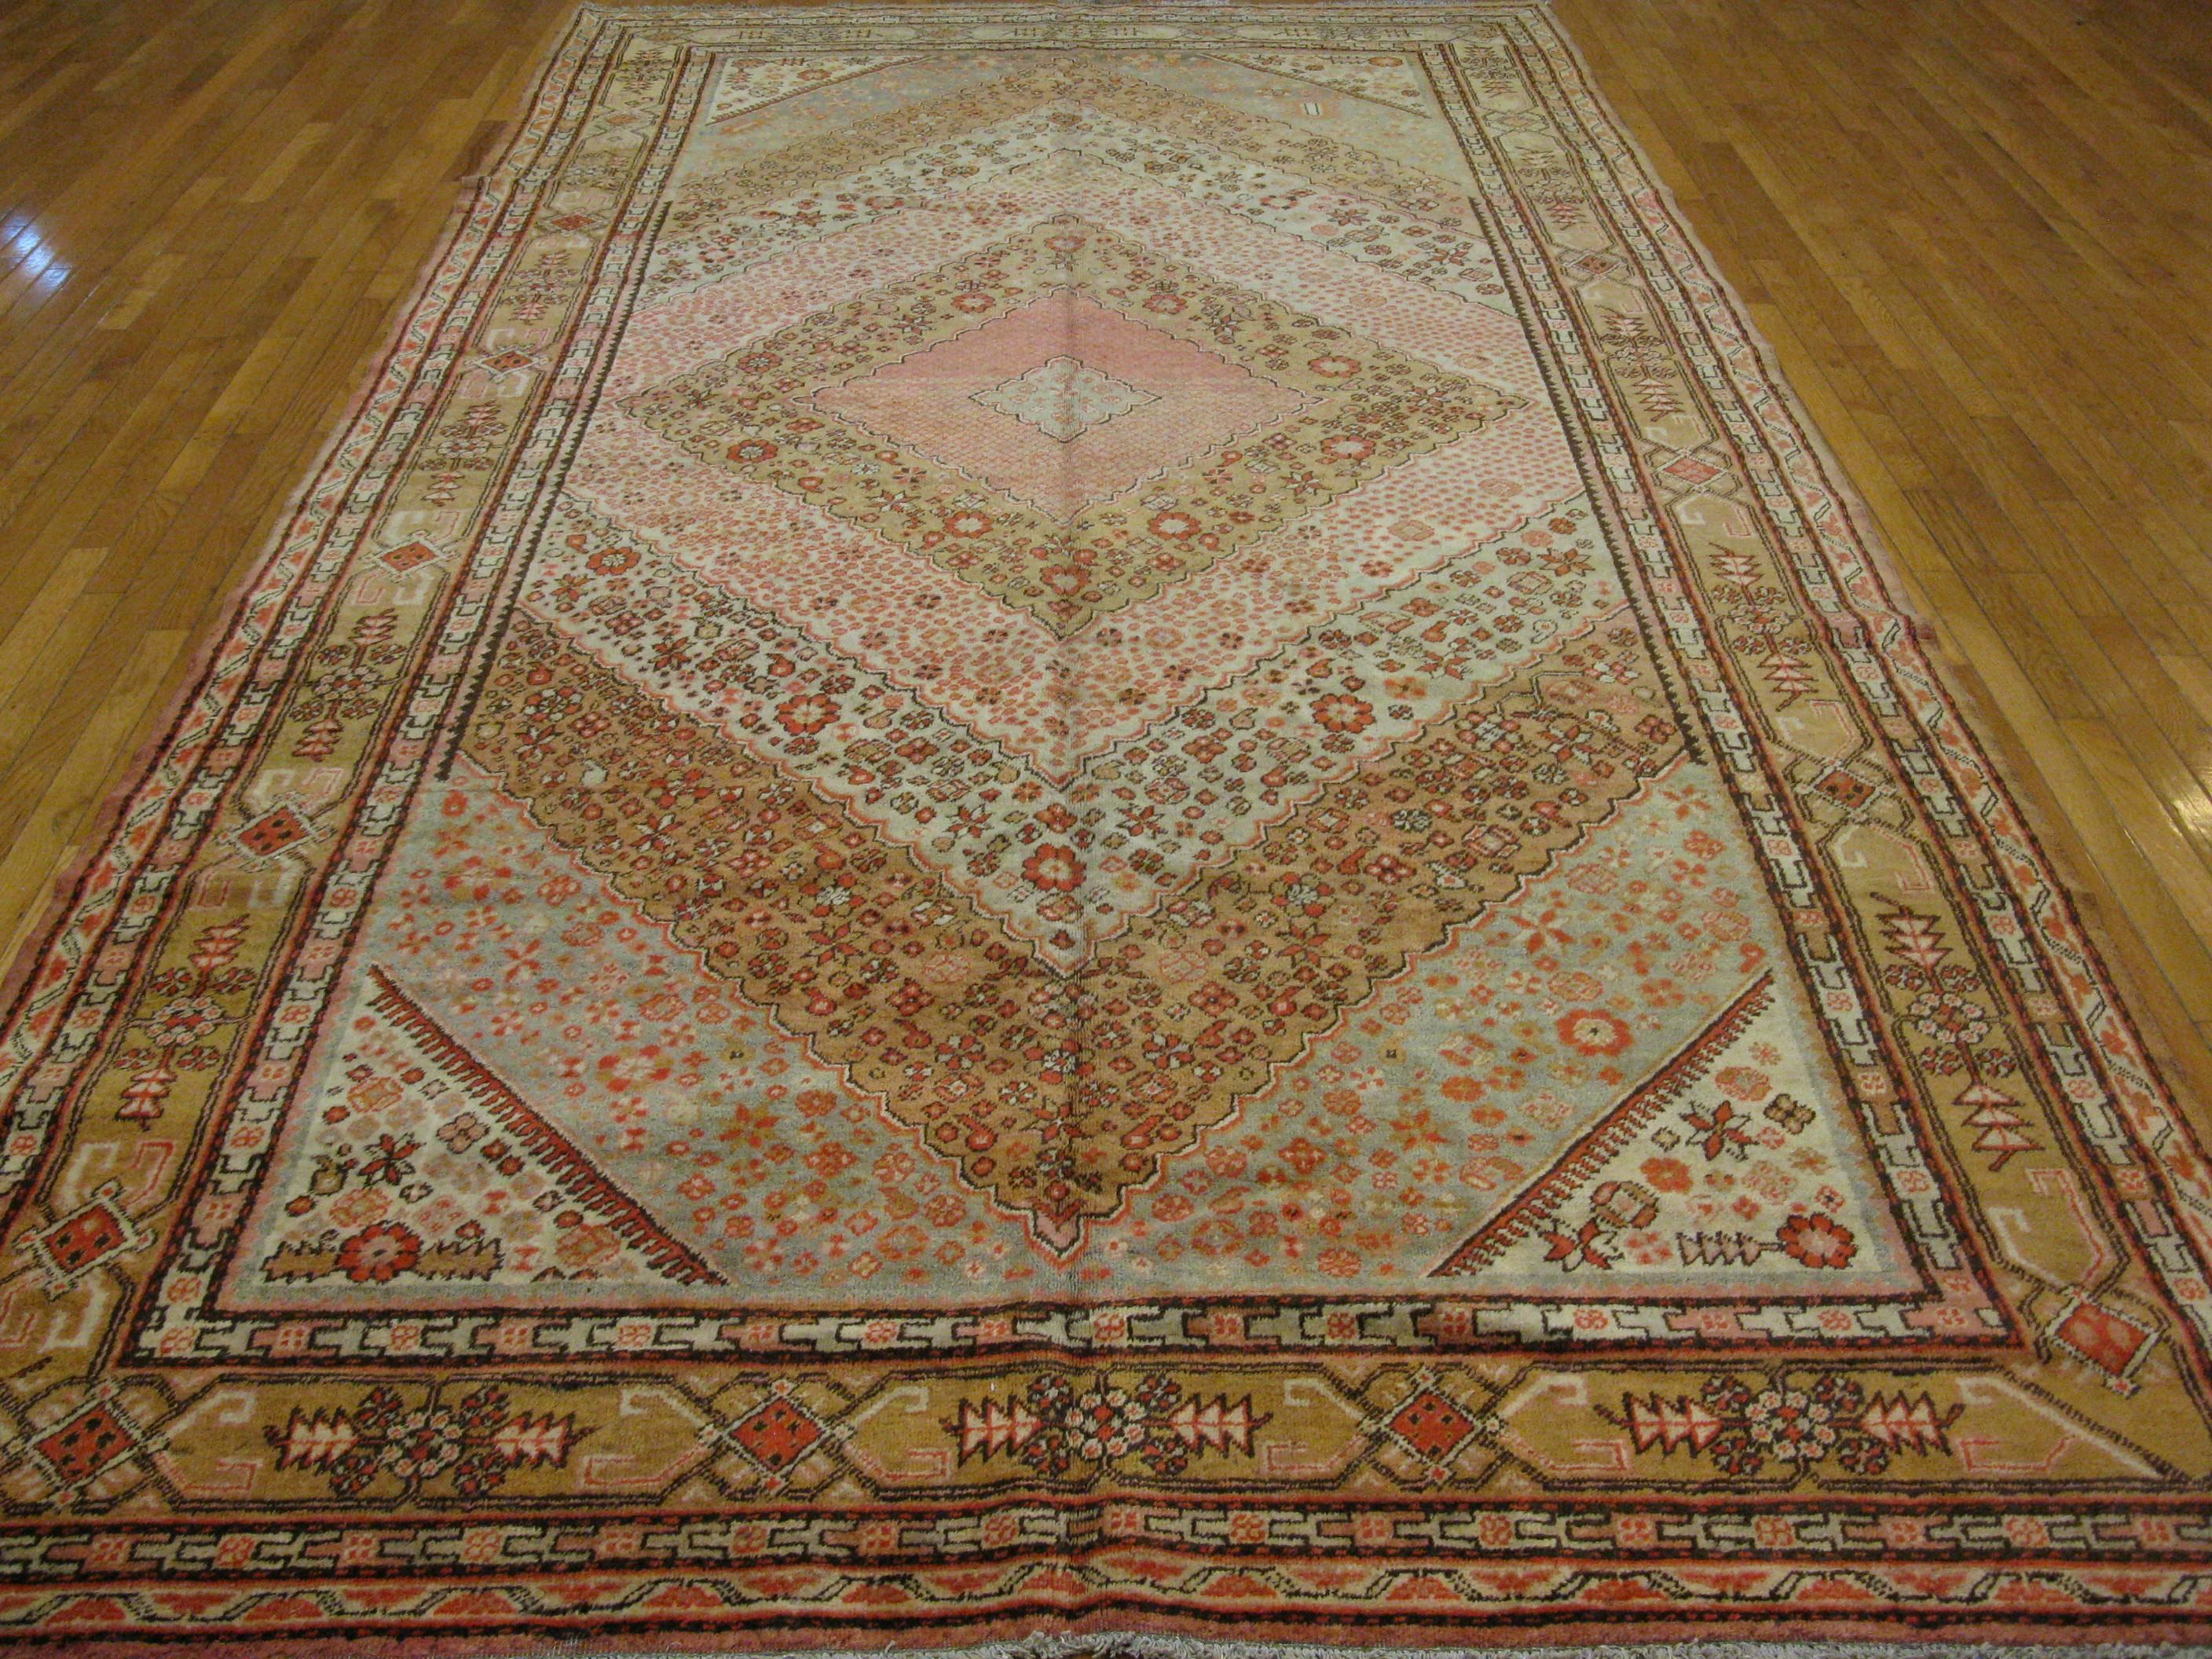 This is a well balanced and outstanding antique hand-knotted Khotan rug. The rug measures 6' 8'' x 13' handmade with wool and natural dyes. It is in great condition.